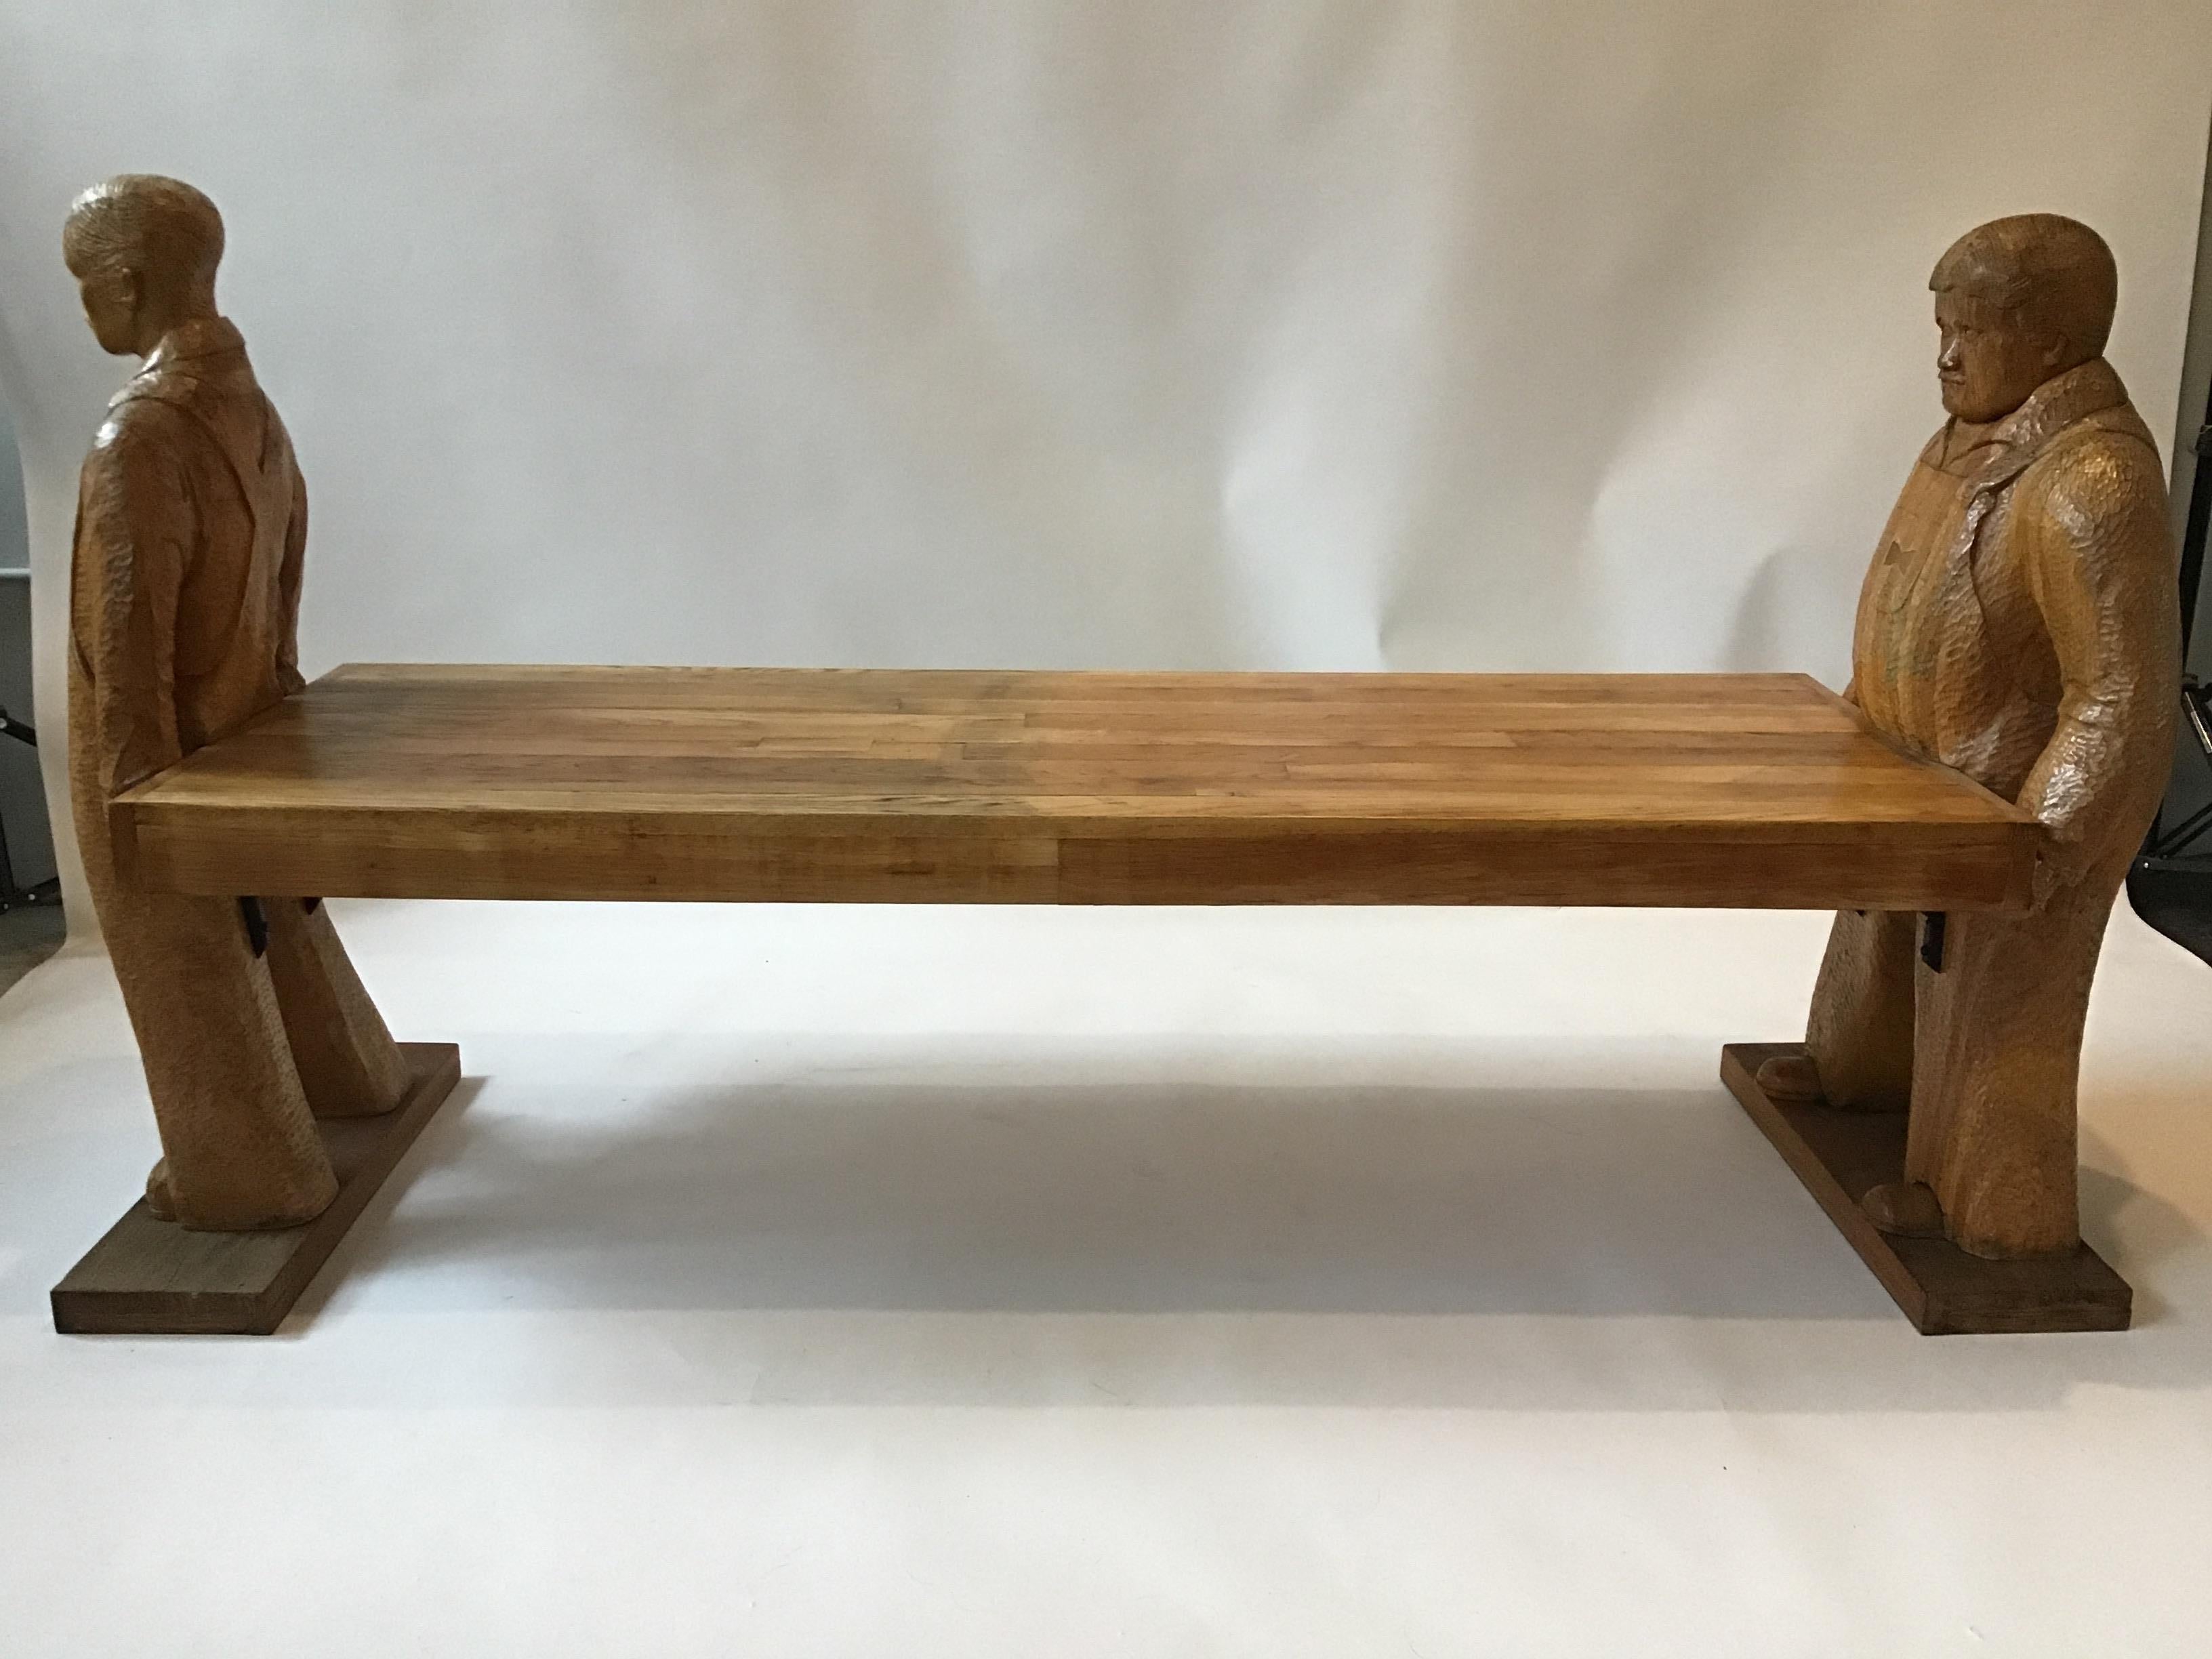 Carved Wood Bench or Table of Two Workers Moving a Piece of Wood 1